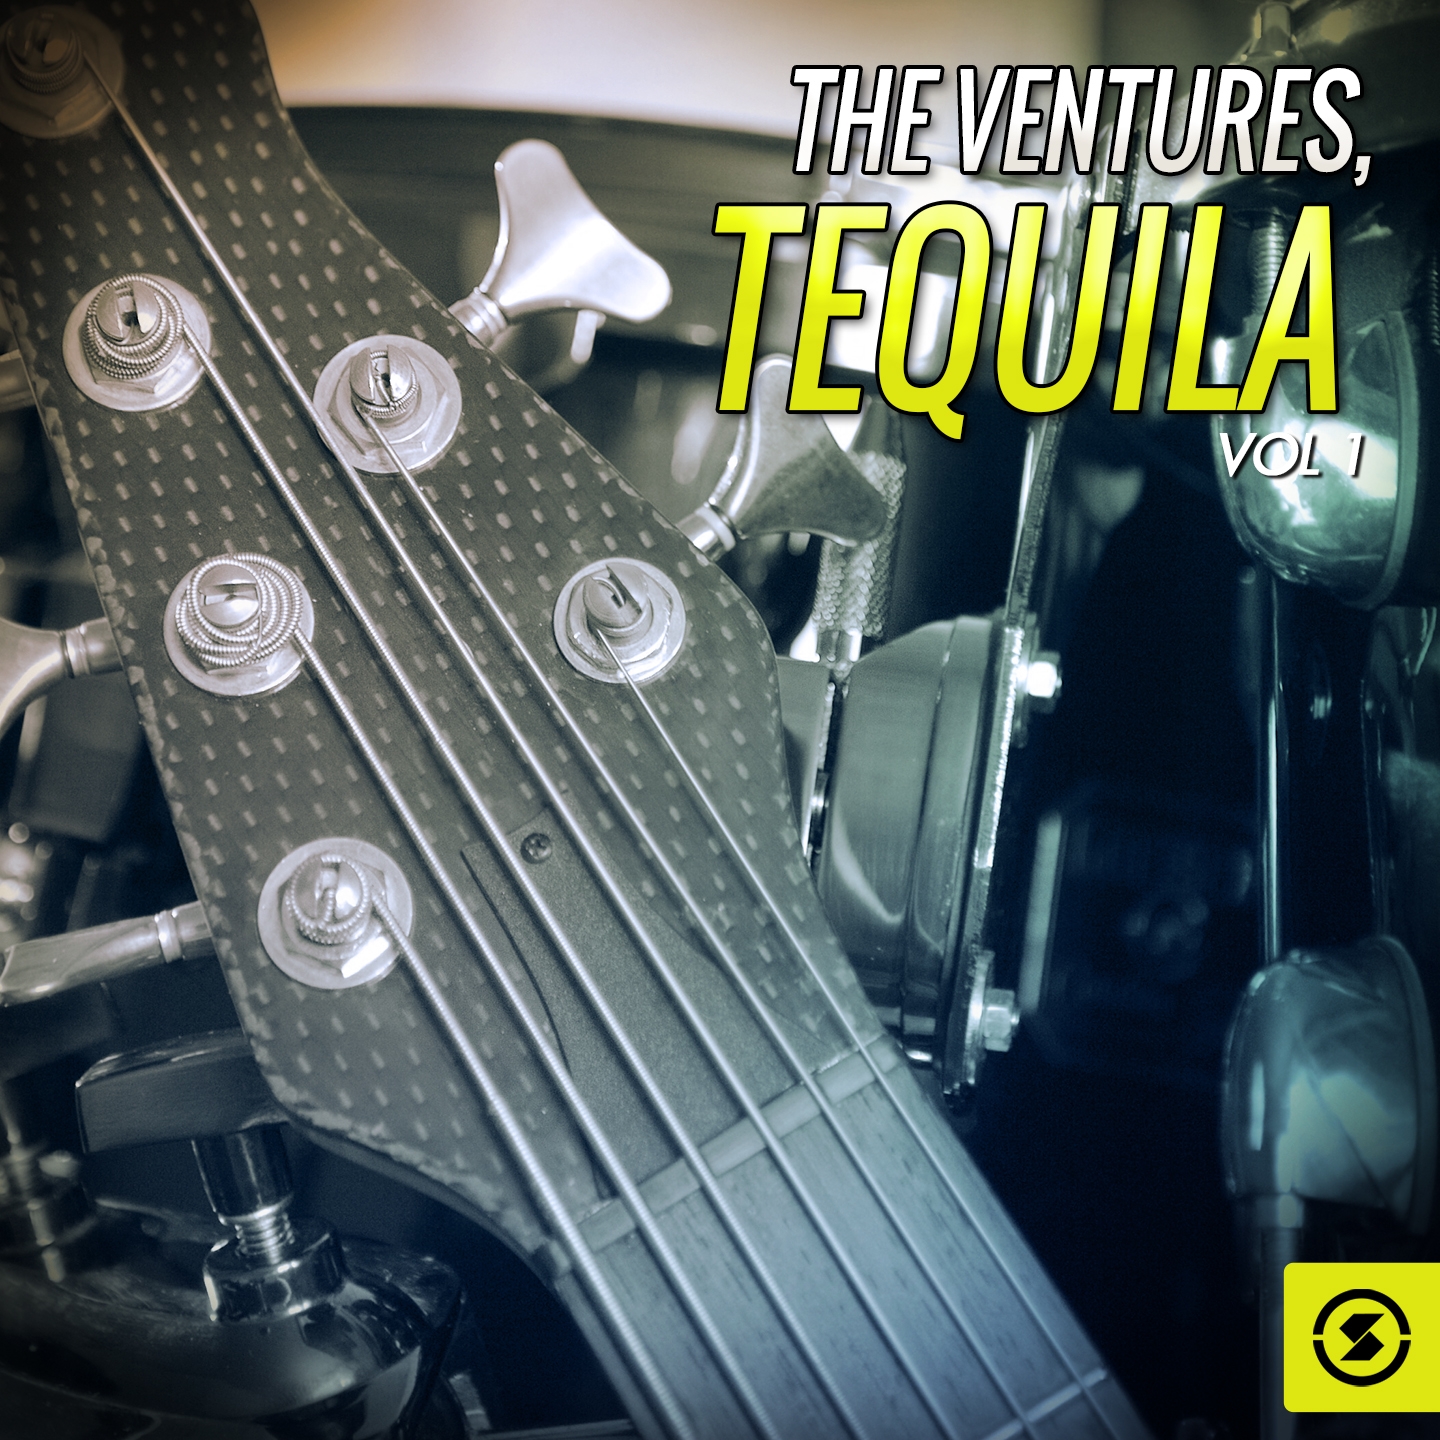 Tequila, Vol. 1